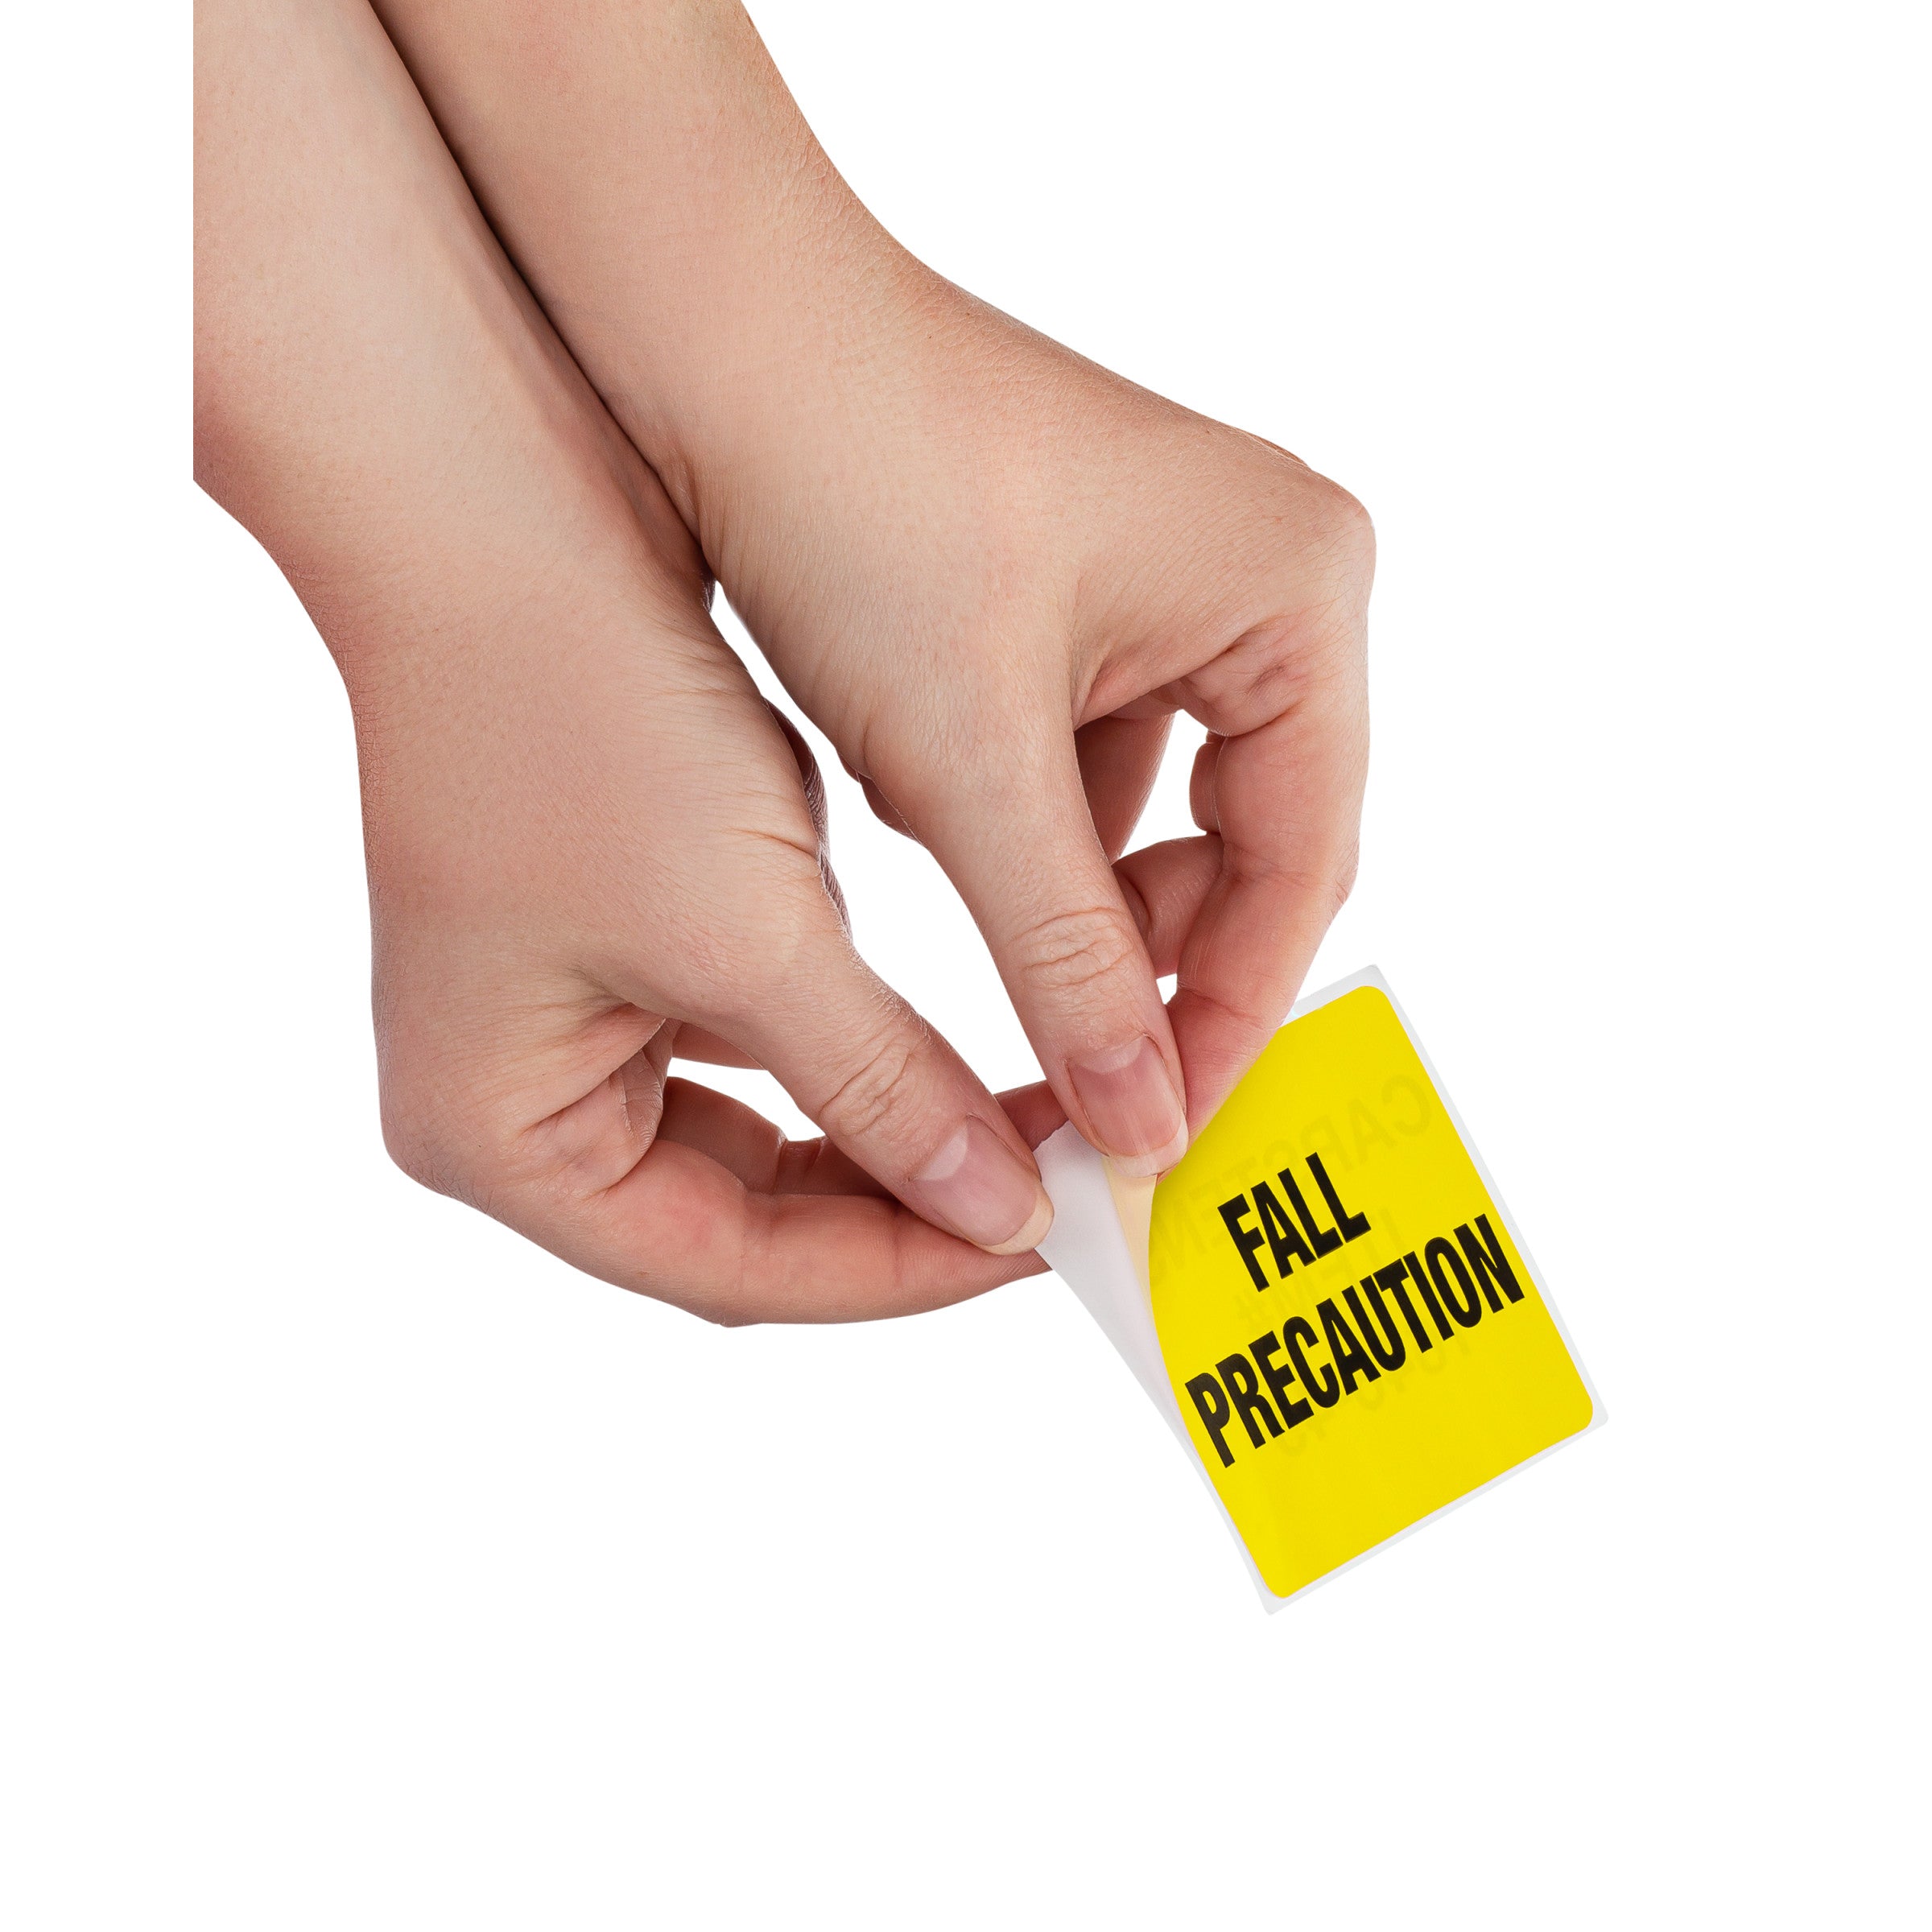 Fall Precaution Alert and Instruction Labels, Yellow, W2.5" x H.2.5" (Roll of 100)